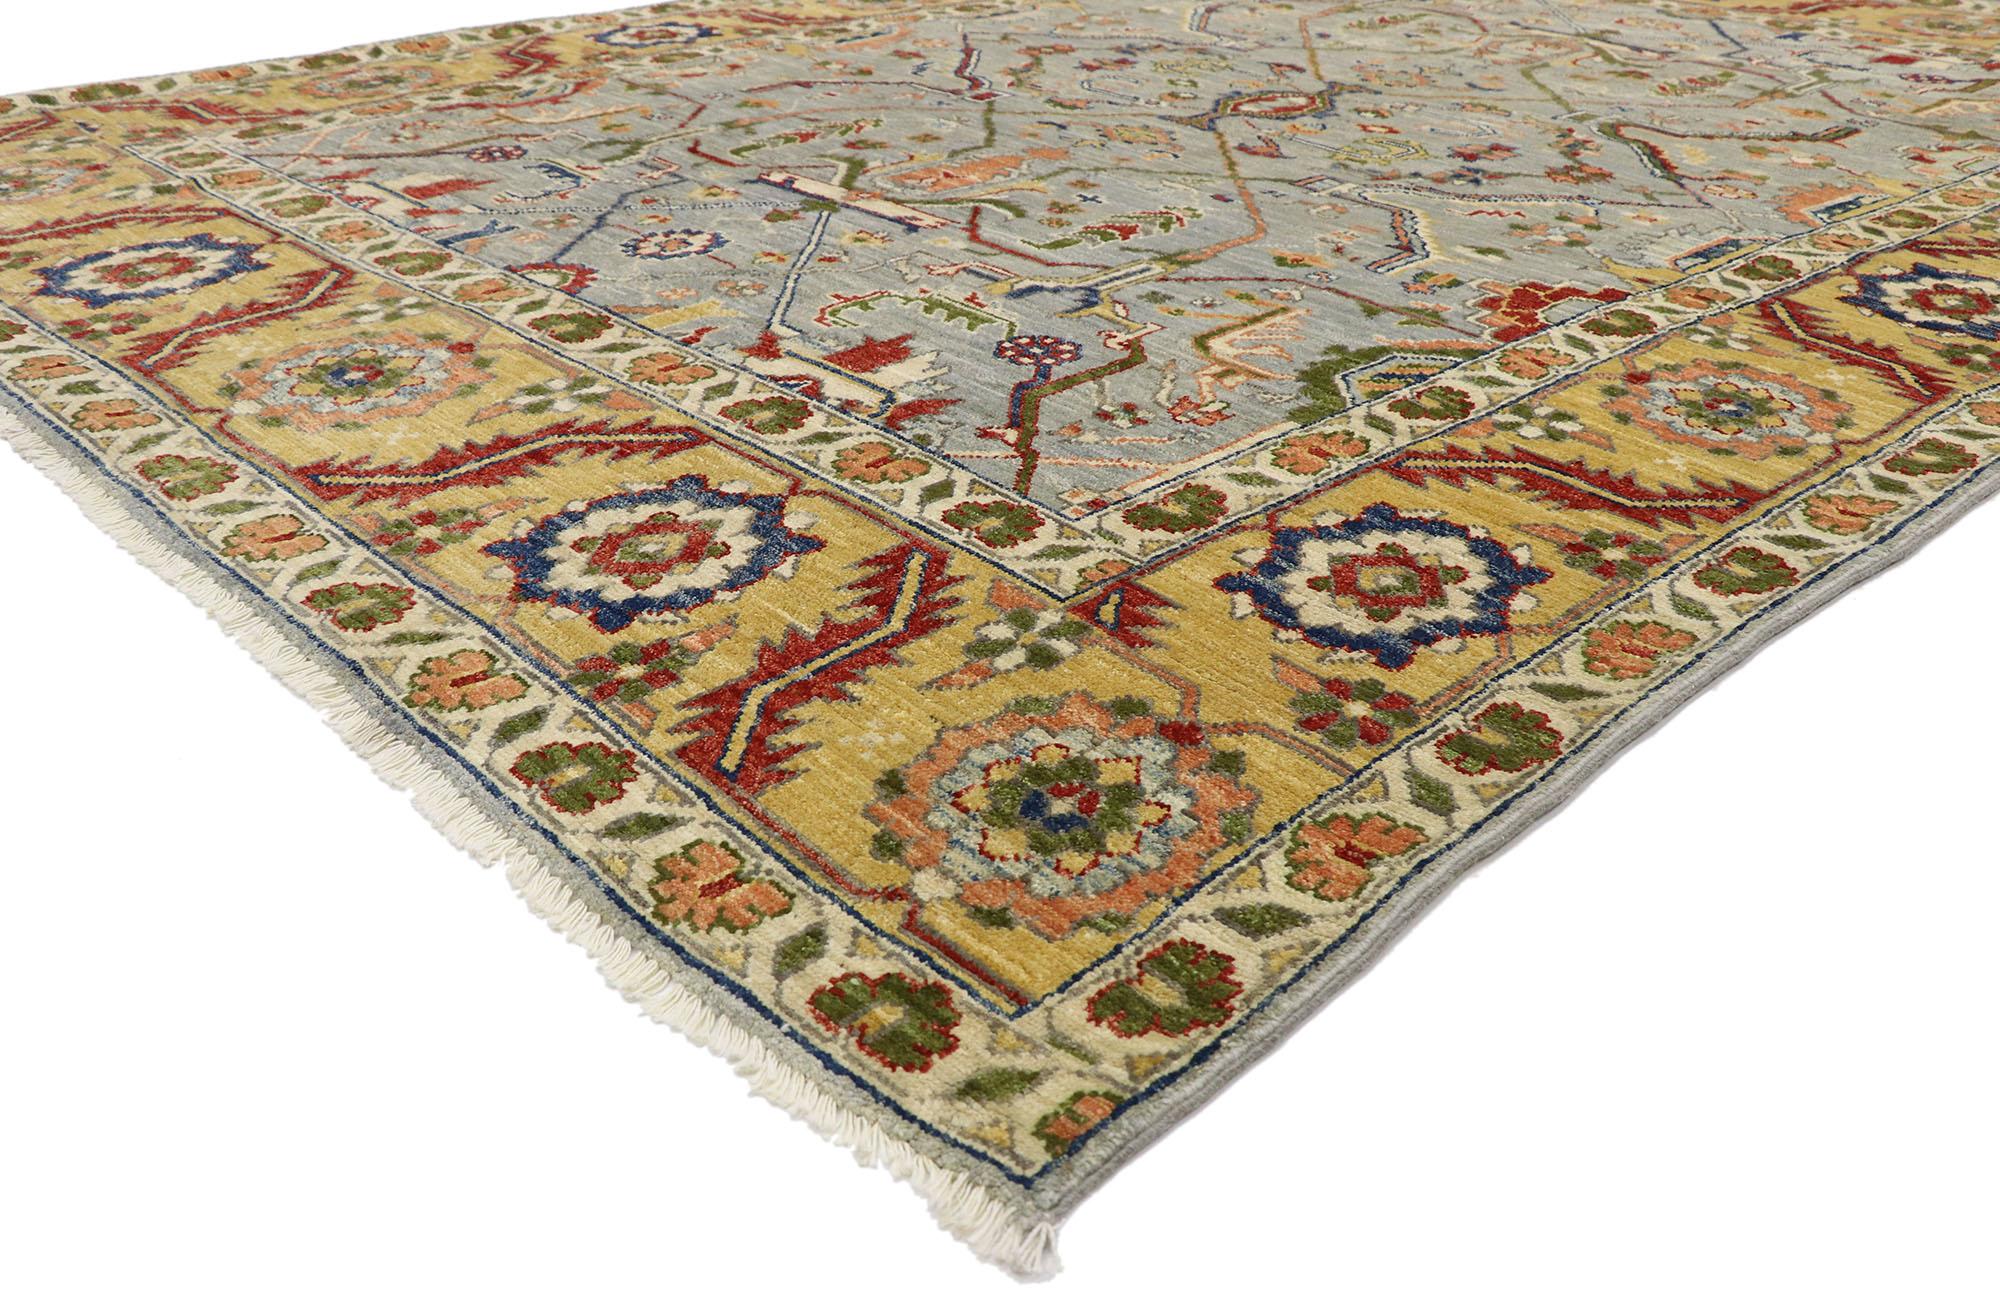 80679 New Contemporary Oushak Style Rug 07'03 x 10'03. Give the look of woven wonders and decorative elegance with this hand-knotted wool contemporary Oushak style rug. The abrashed field displays an all-over botanical lattice composed of stylized